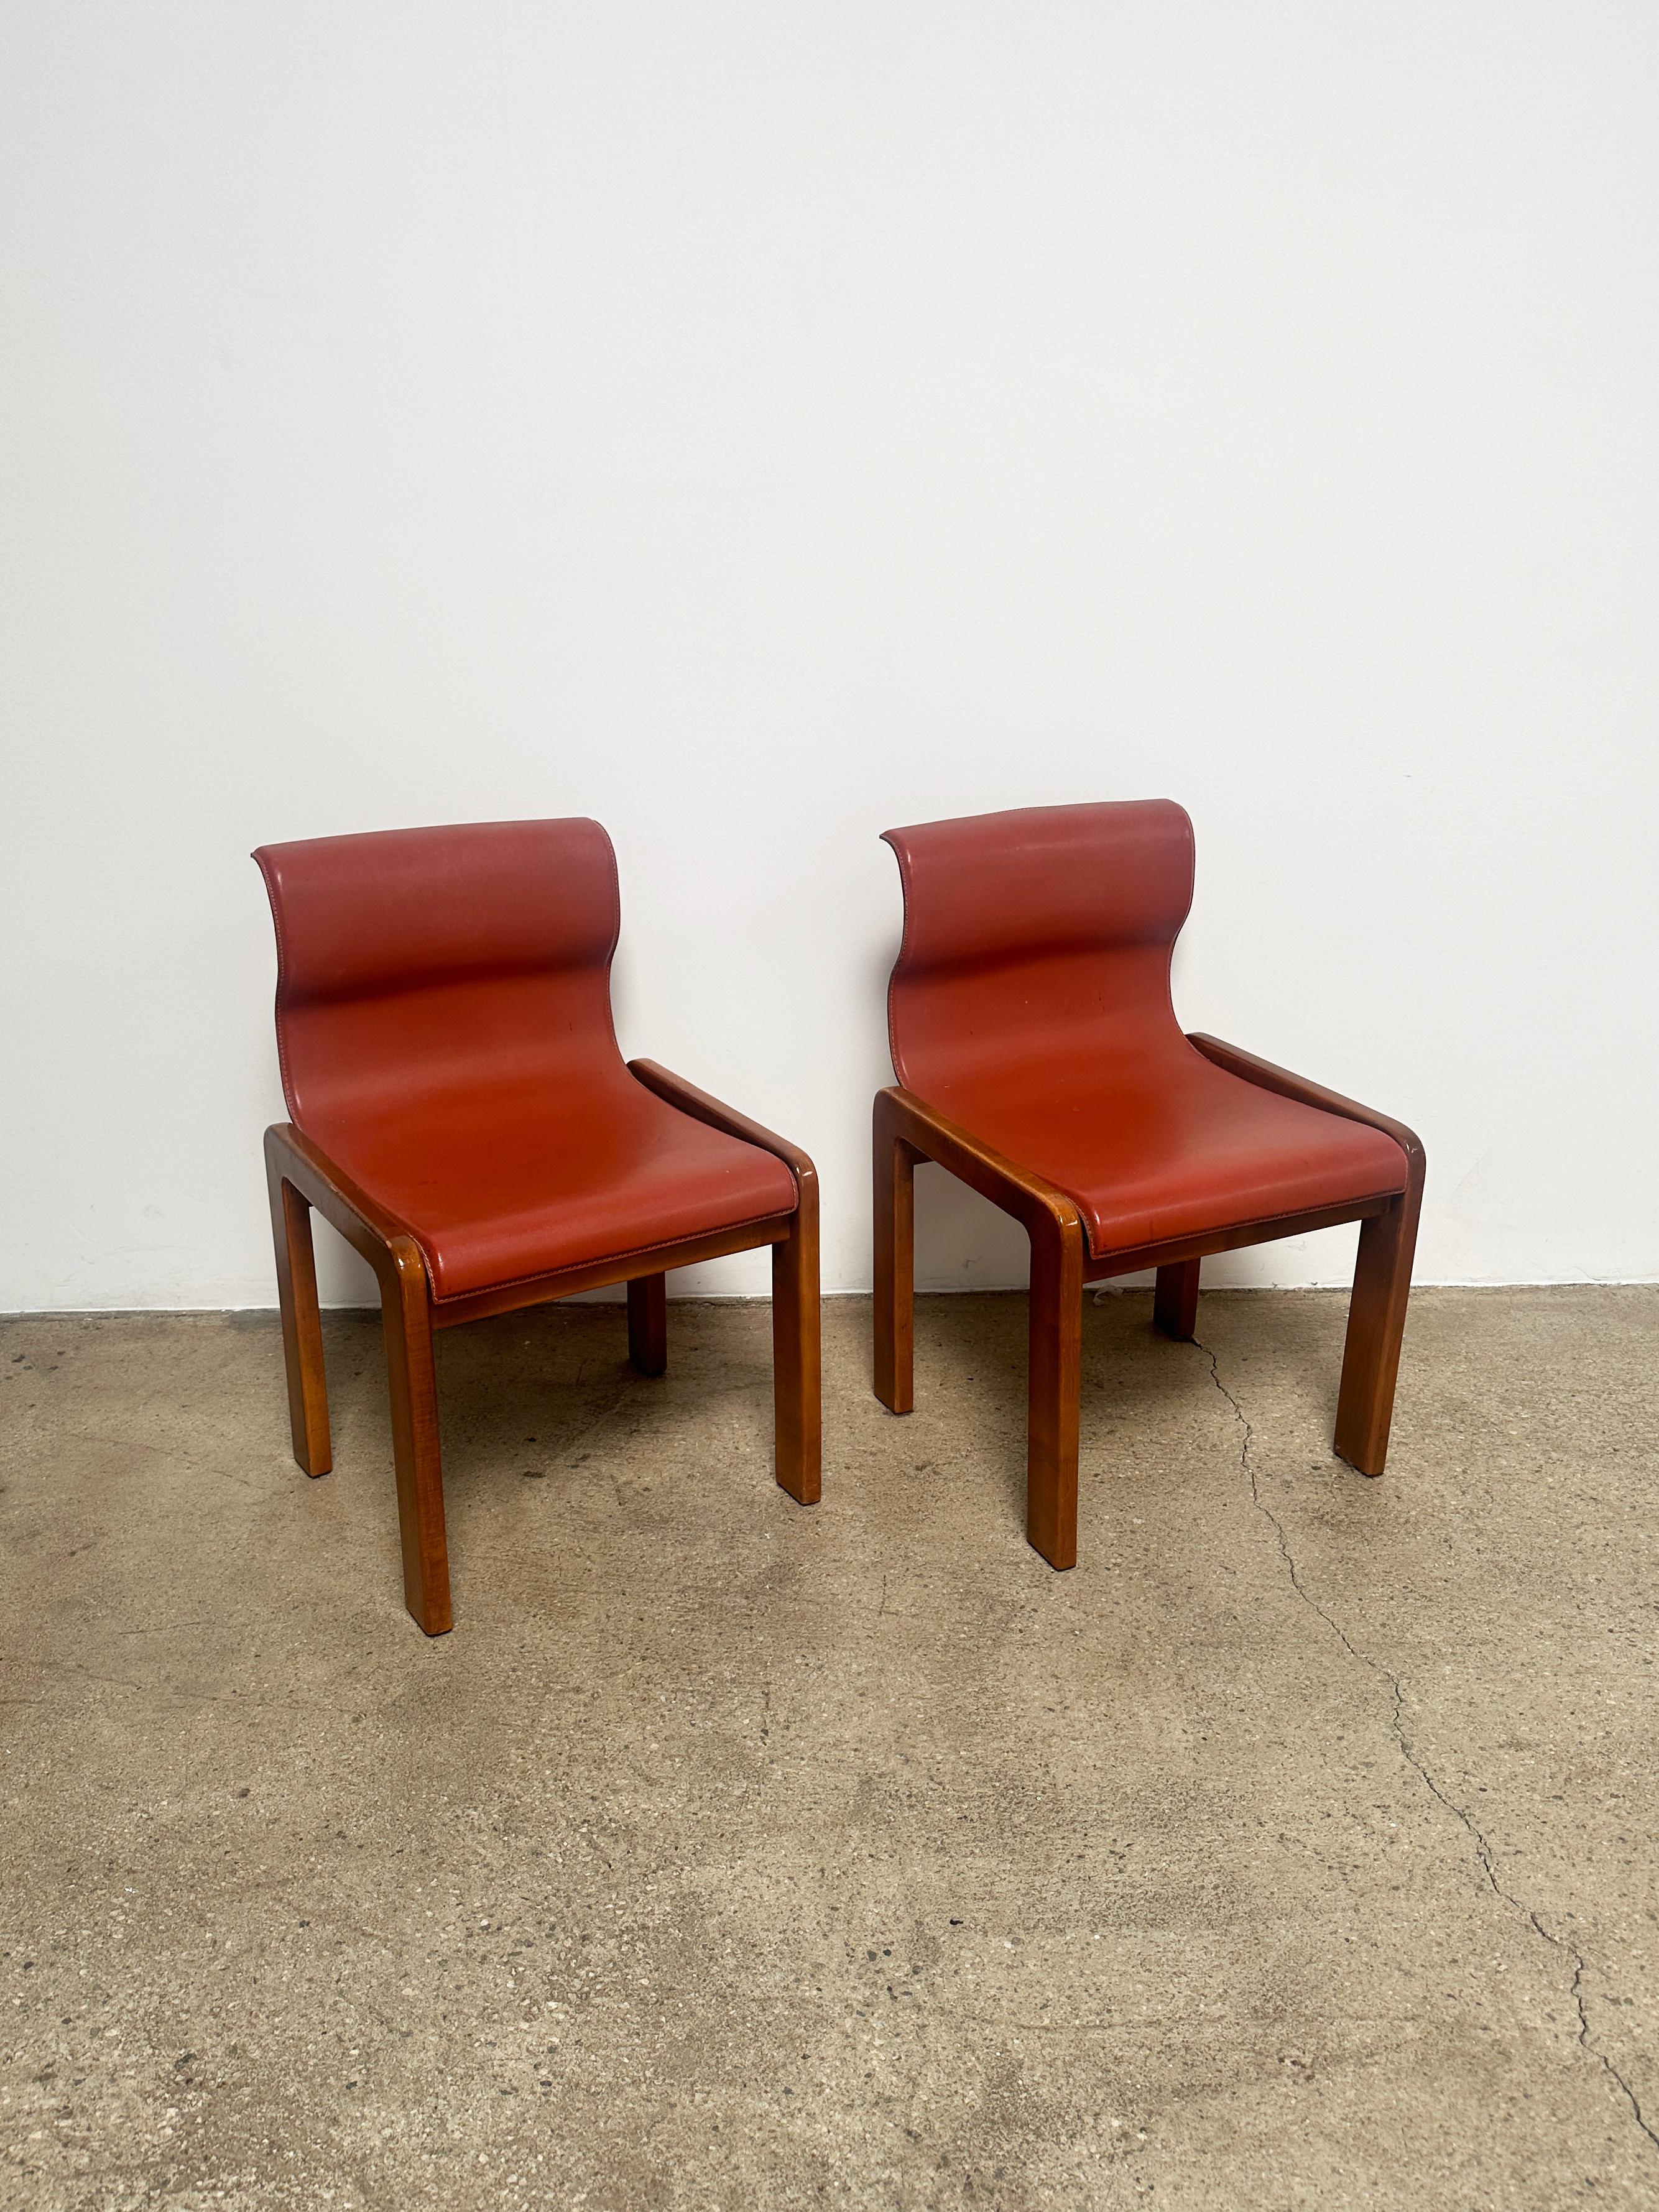 Set of four dining chairs designed by Afra & Tobia Scarpa in the late 60s. The legs are made of ash, and the seat and back made of plywood. It is upholstered with brick-colored leather, and presented in an ergonomic shape found in the late 80's